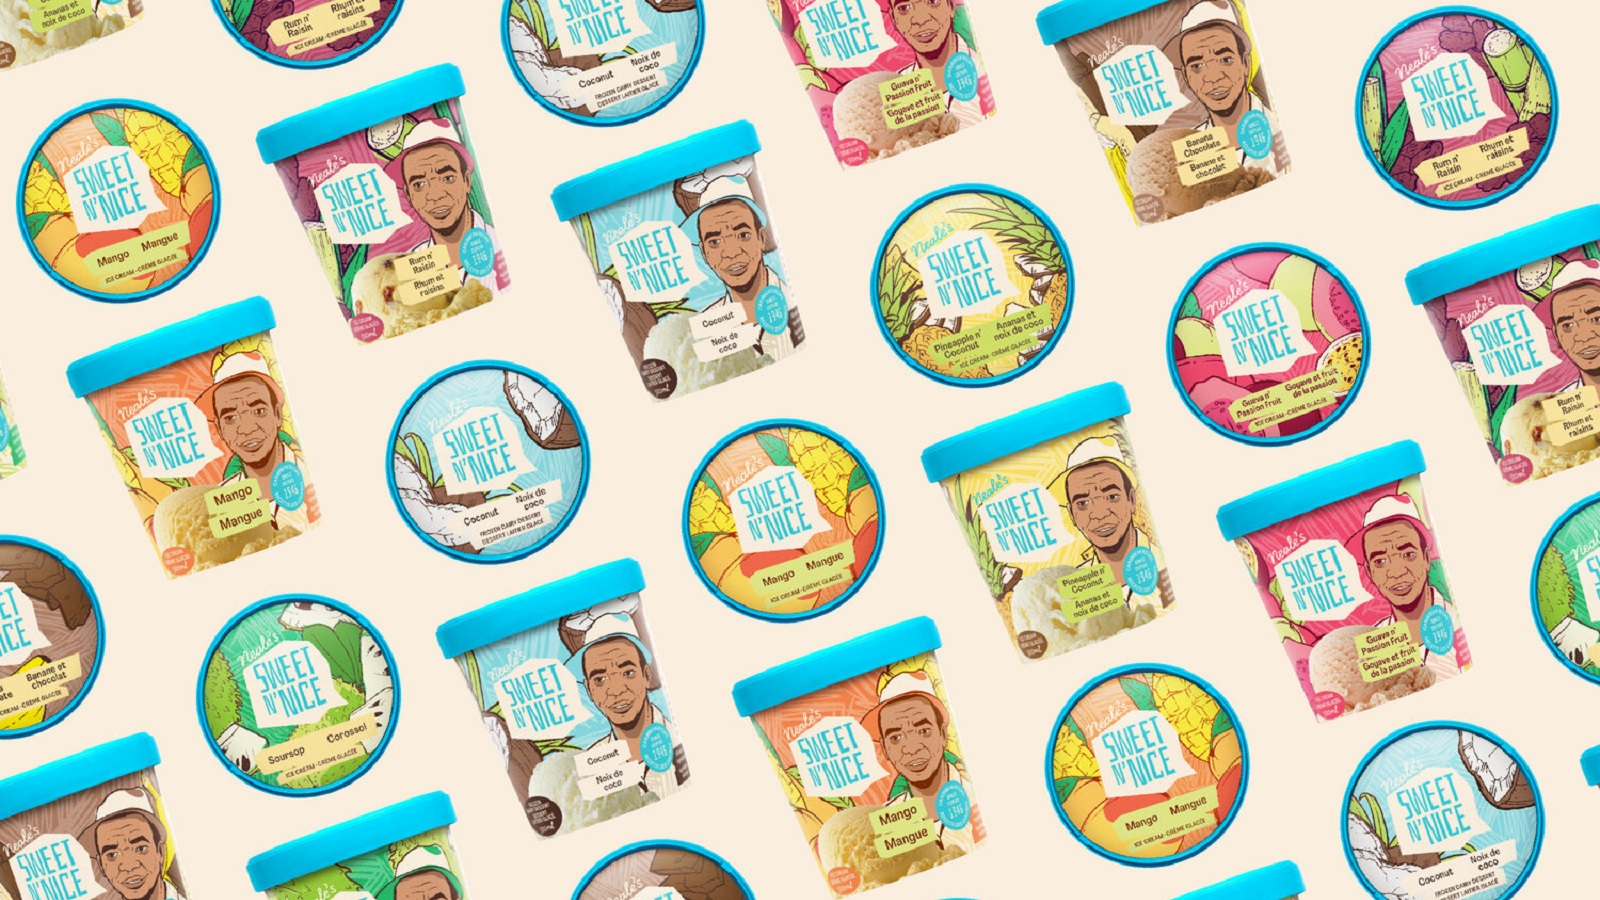 Neale’s Sweet N’ Nice’s Packaging Reflects Its Caribbean Roots